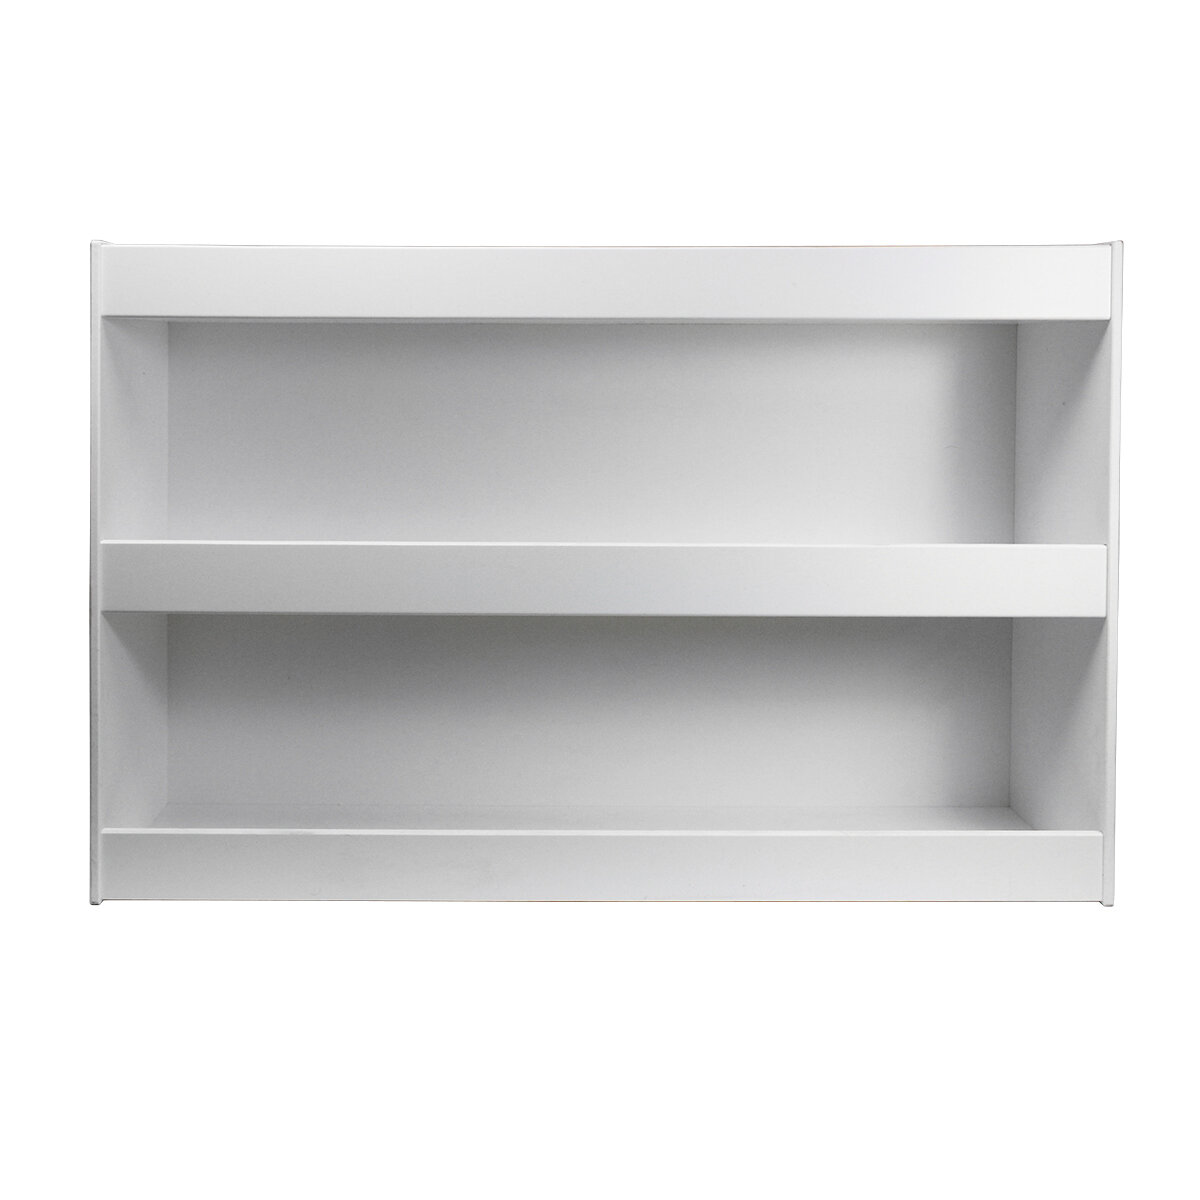 24 Width x 16 Height x 9 Depth White TrippNT 50606 PVC Angled Double Safety Shelves 